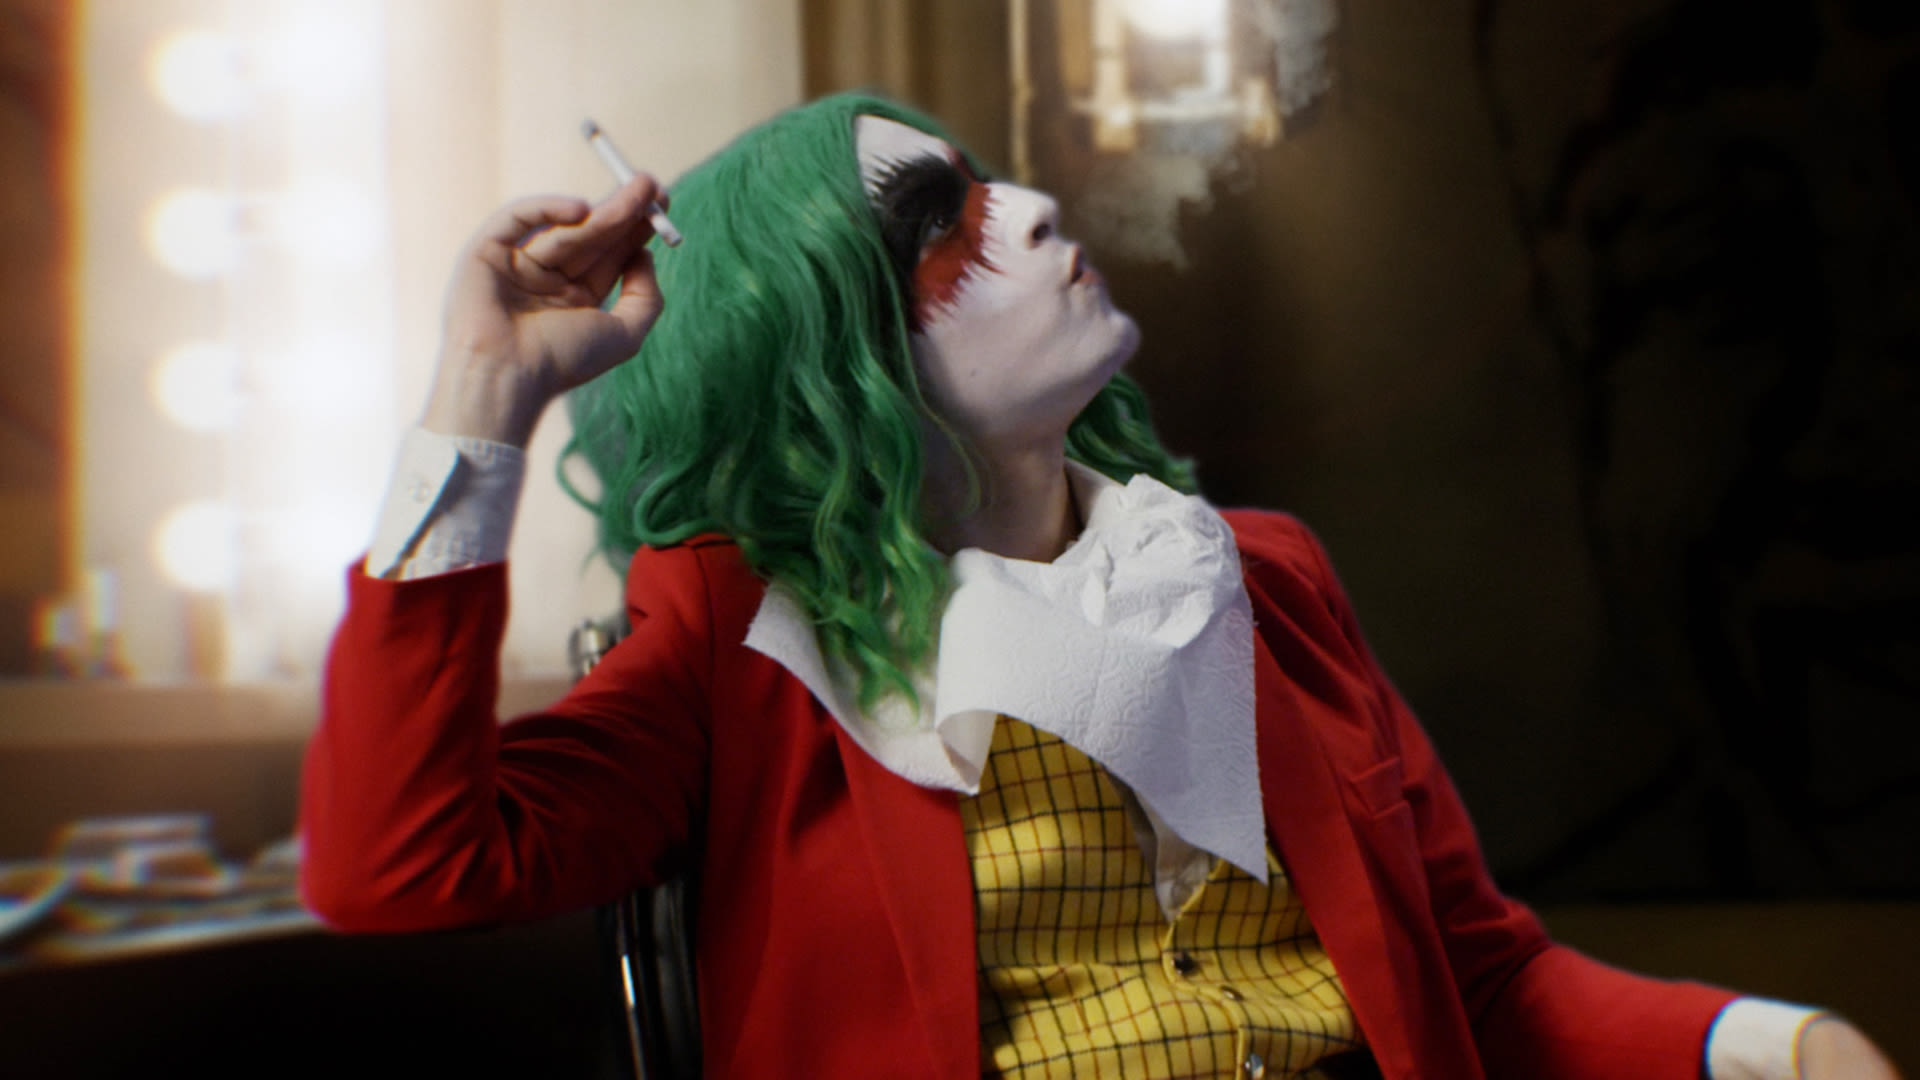 Why so serious? 'The People's Joker' warps Batman tropes into wildly inventive punk parody